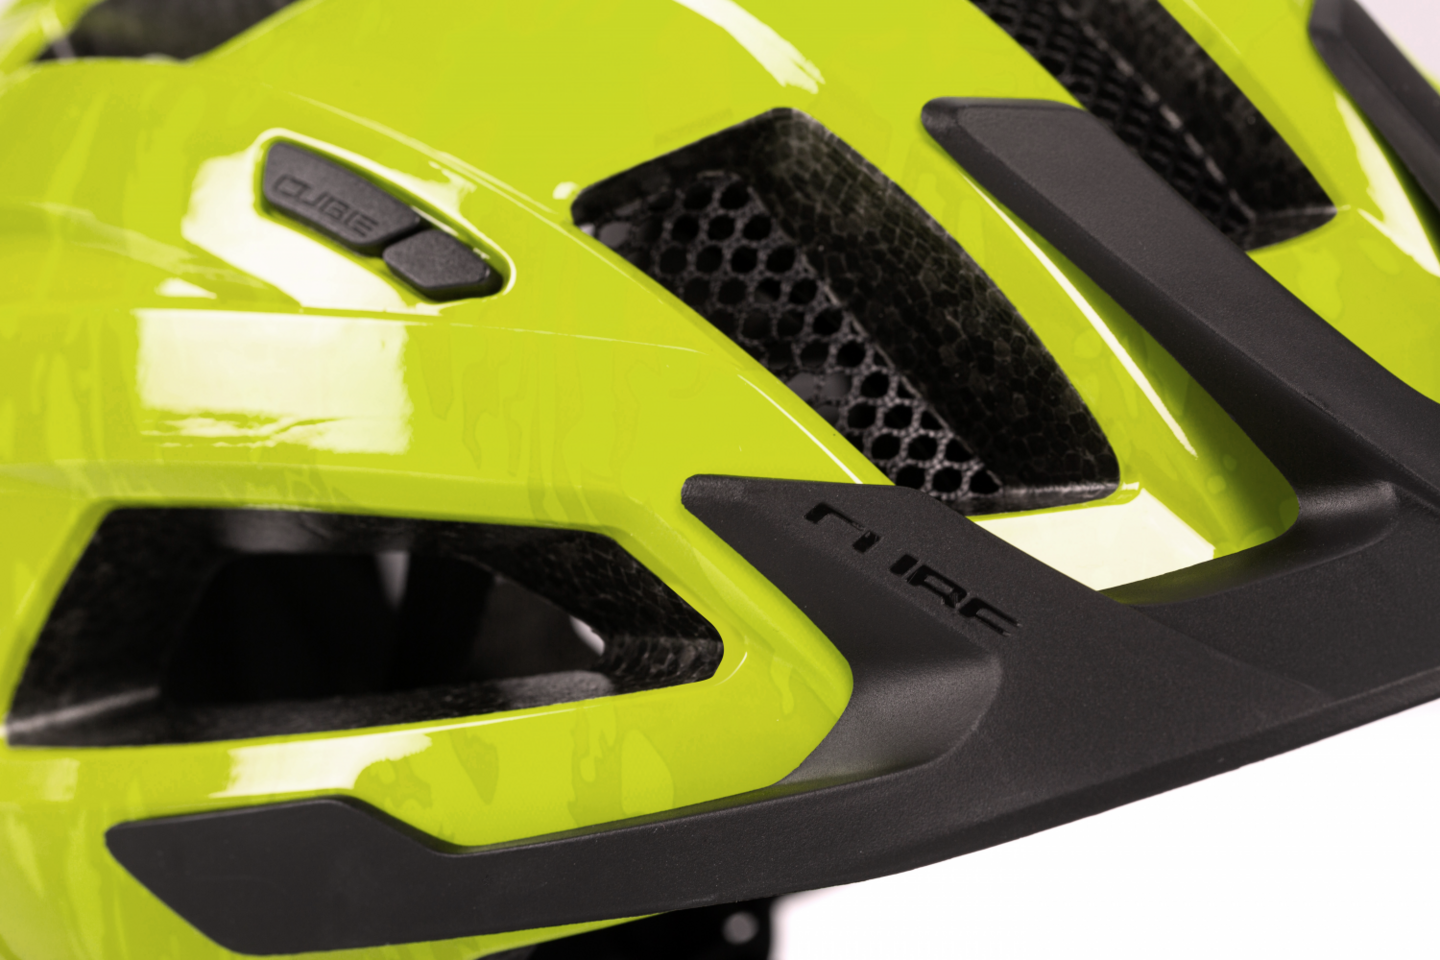 CUBE Helm STEEP  / glossy citrone L (57-62)